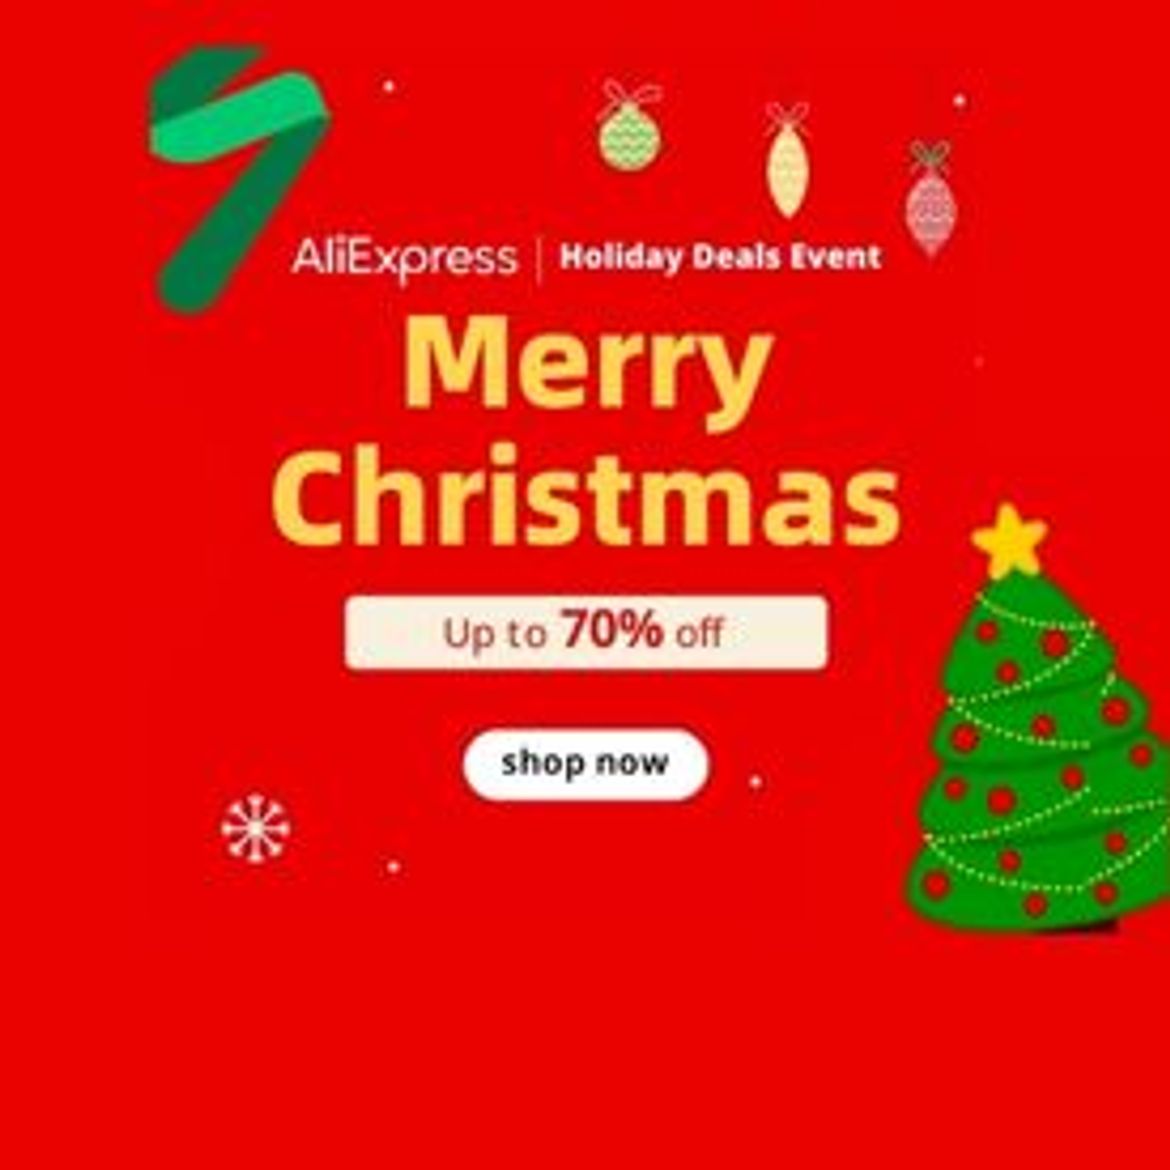 Get up to 70% off at AliExpress Holiday Deals Sale with Fast and Free Shipping! Get $5 off every $40 spent (up to $15 off)